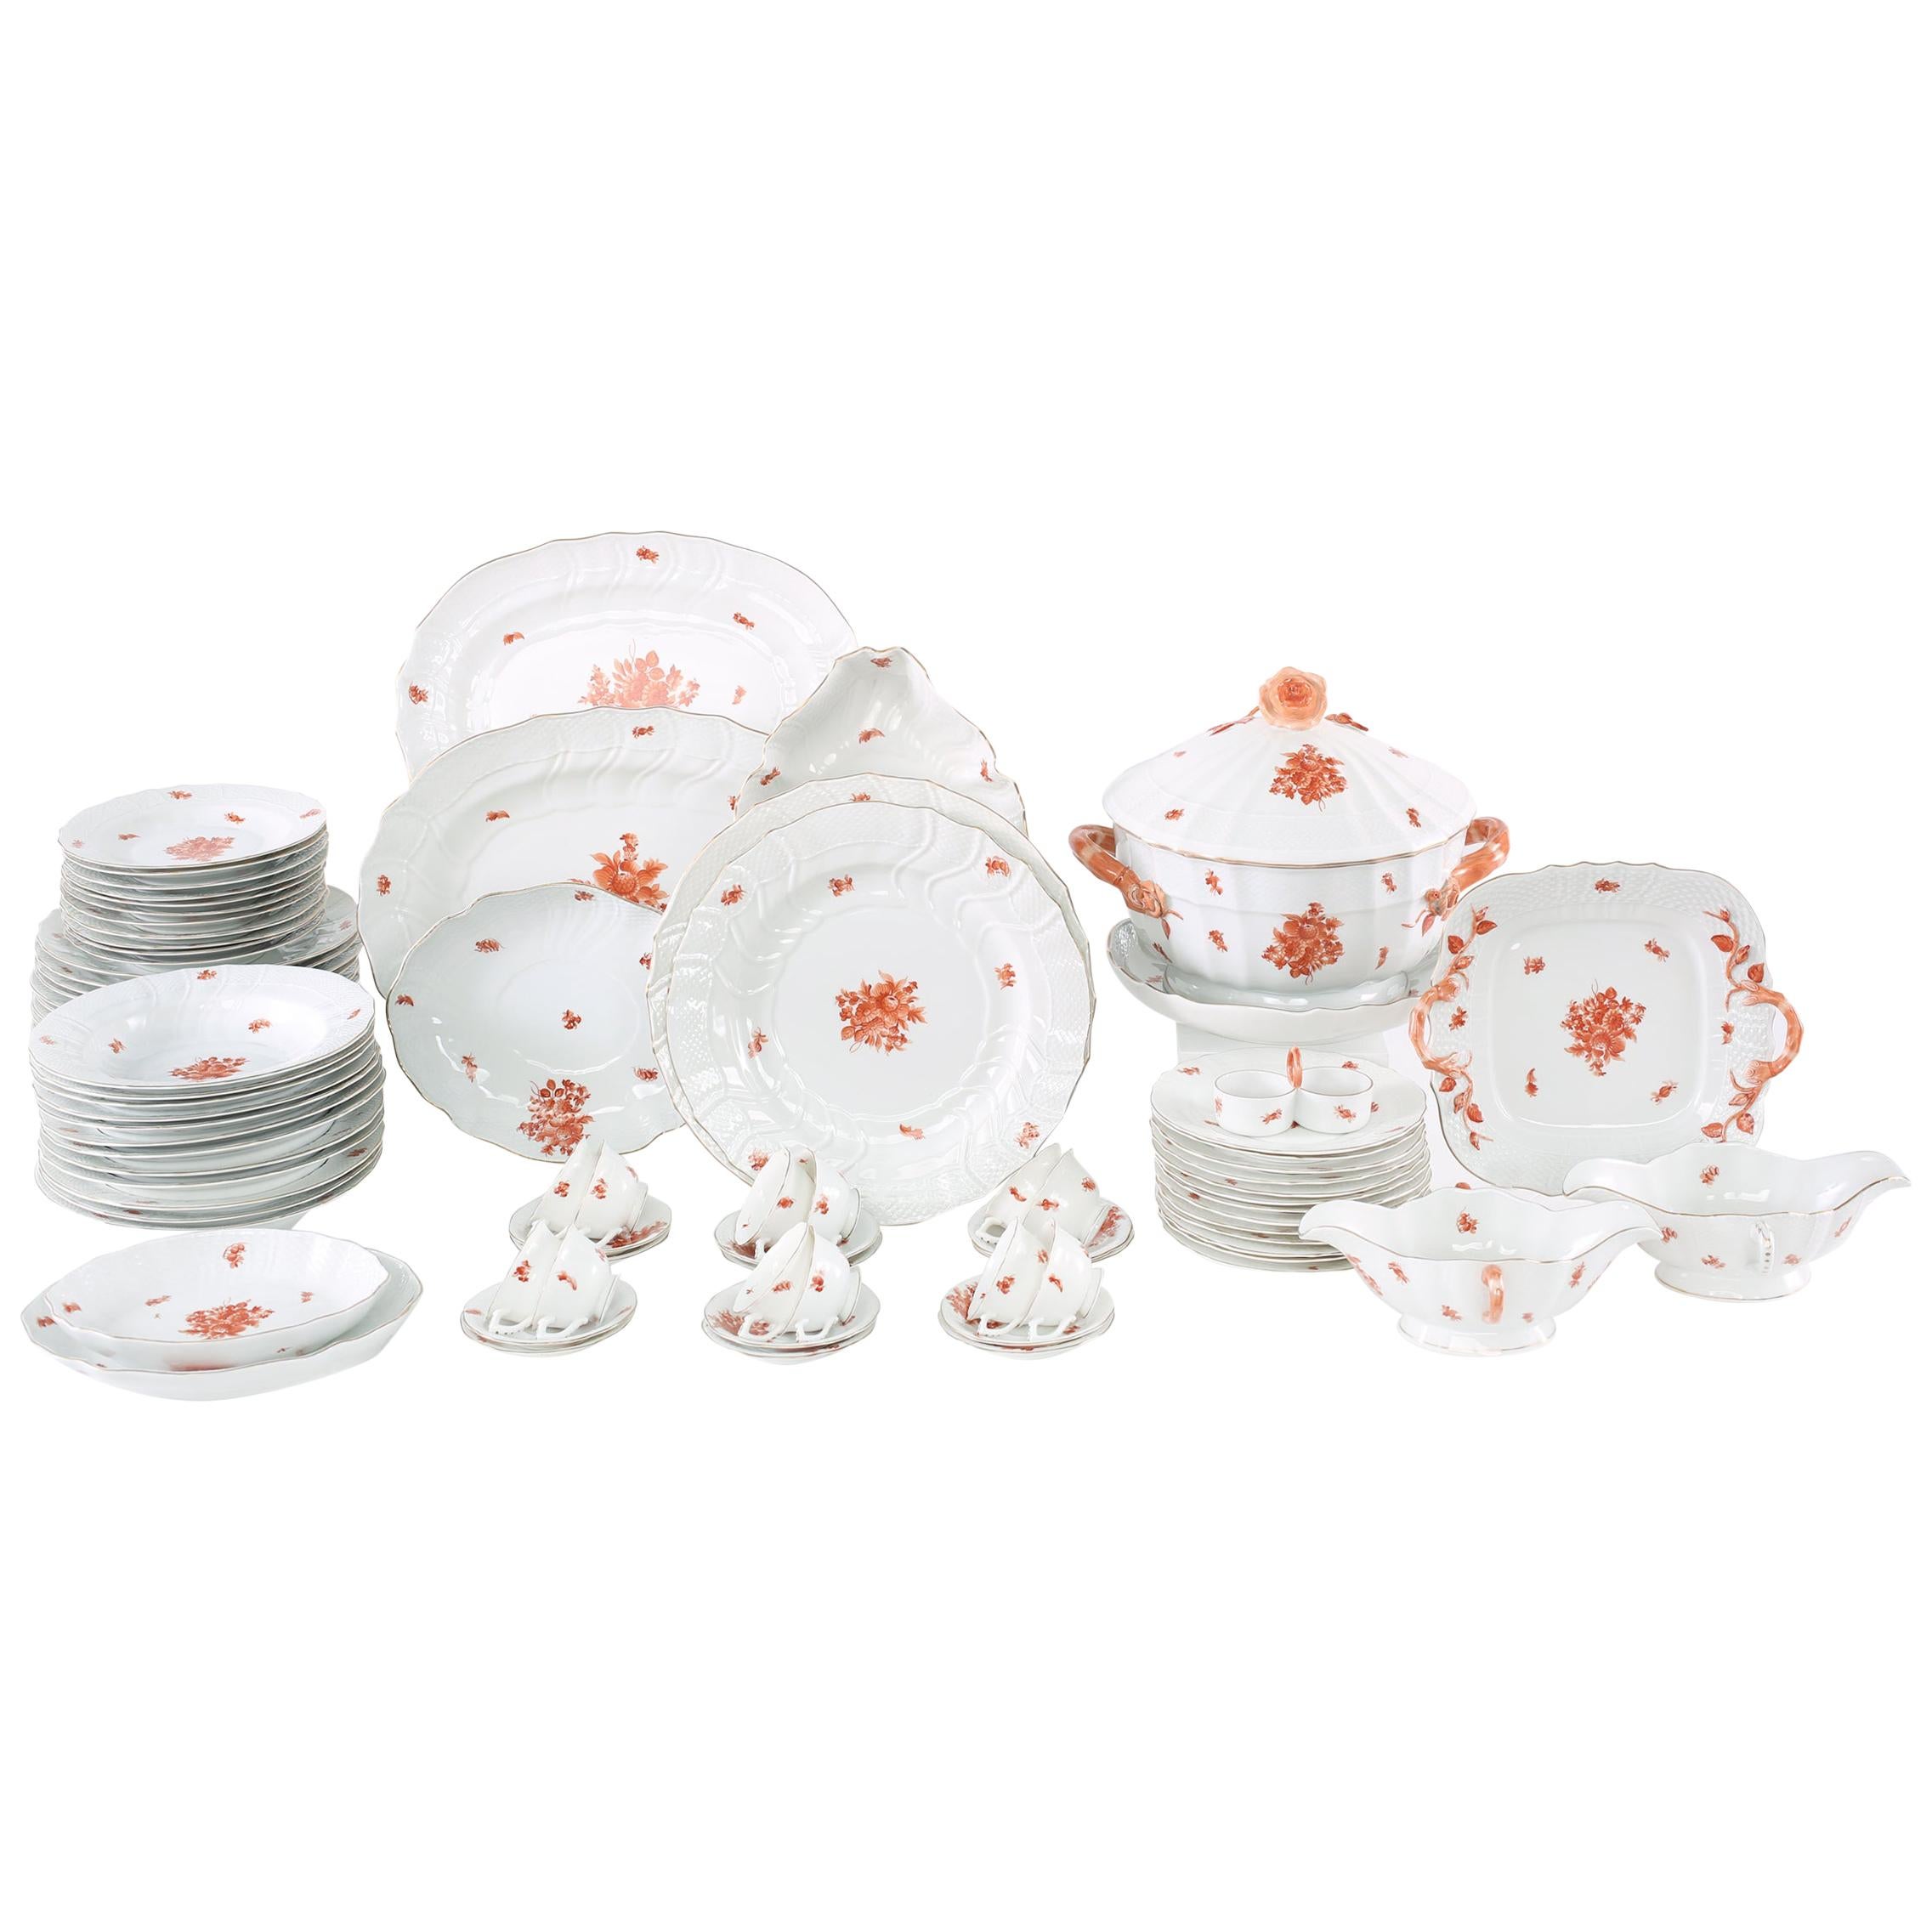 Herend Hungarian Dinner Service / Serving Pieces